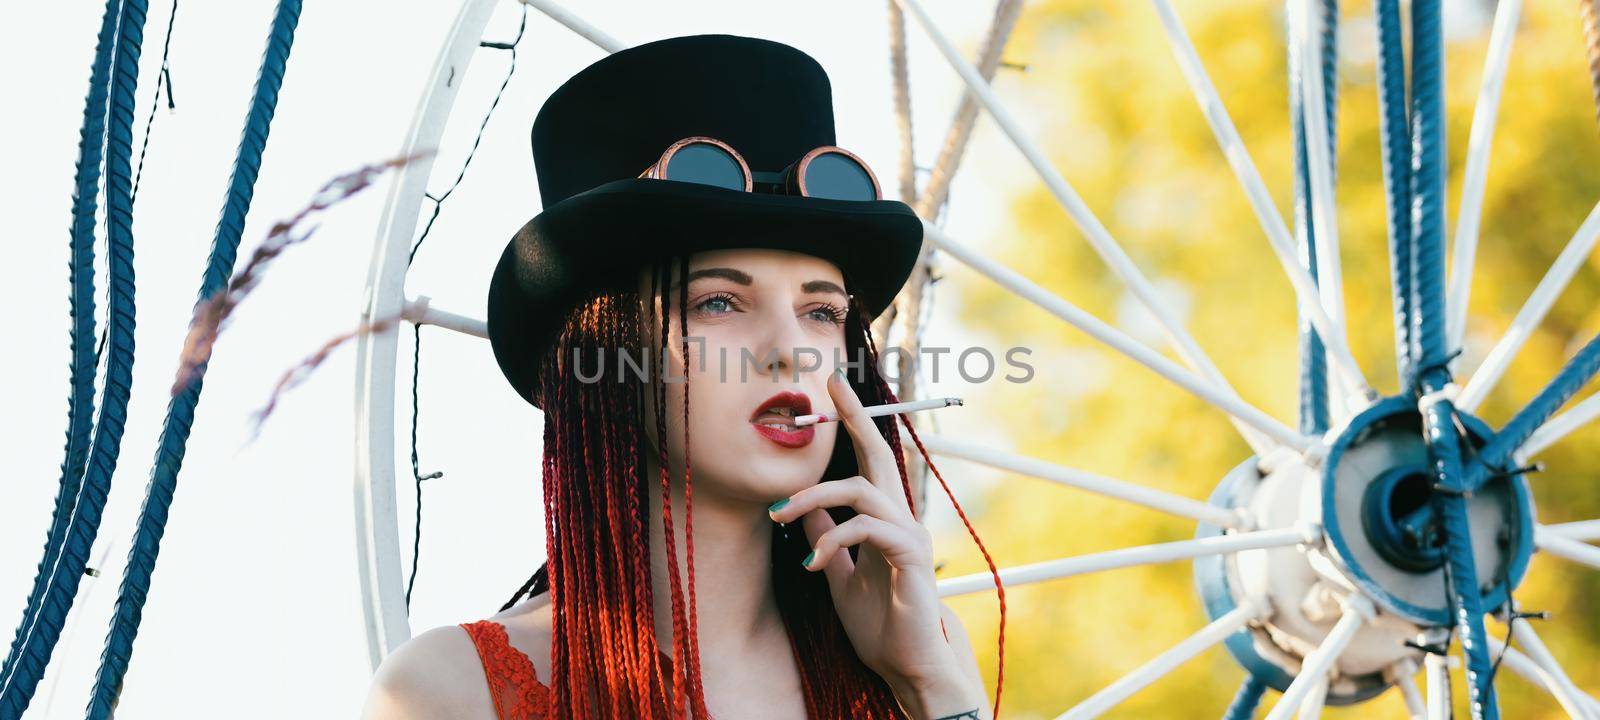 Glamorous girl with scarlet dreadlocks and cigarette  by palinchak